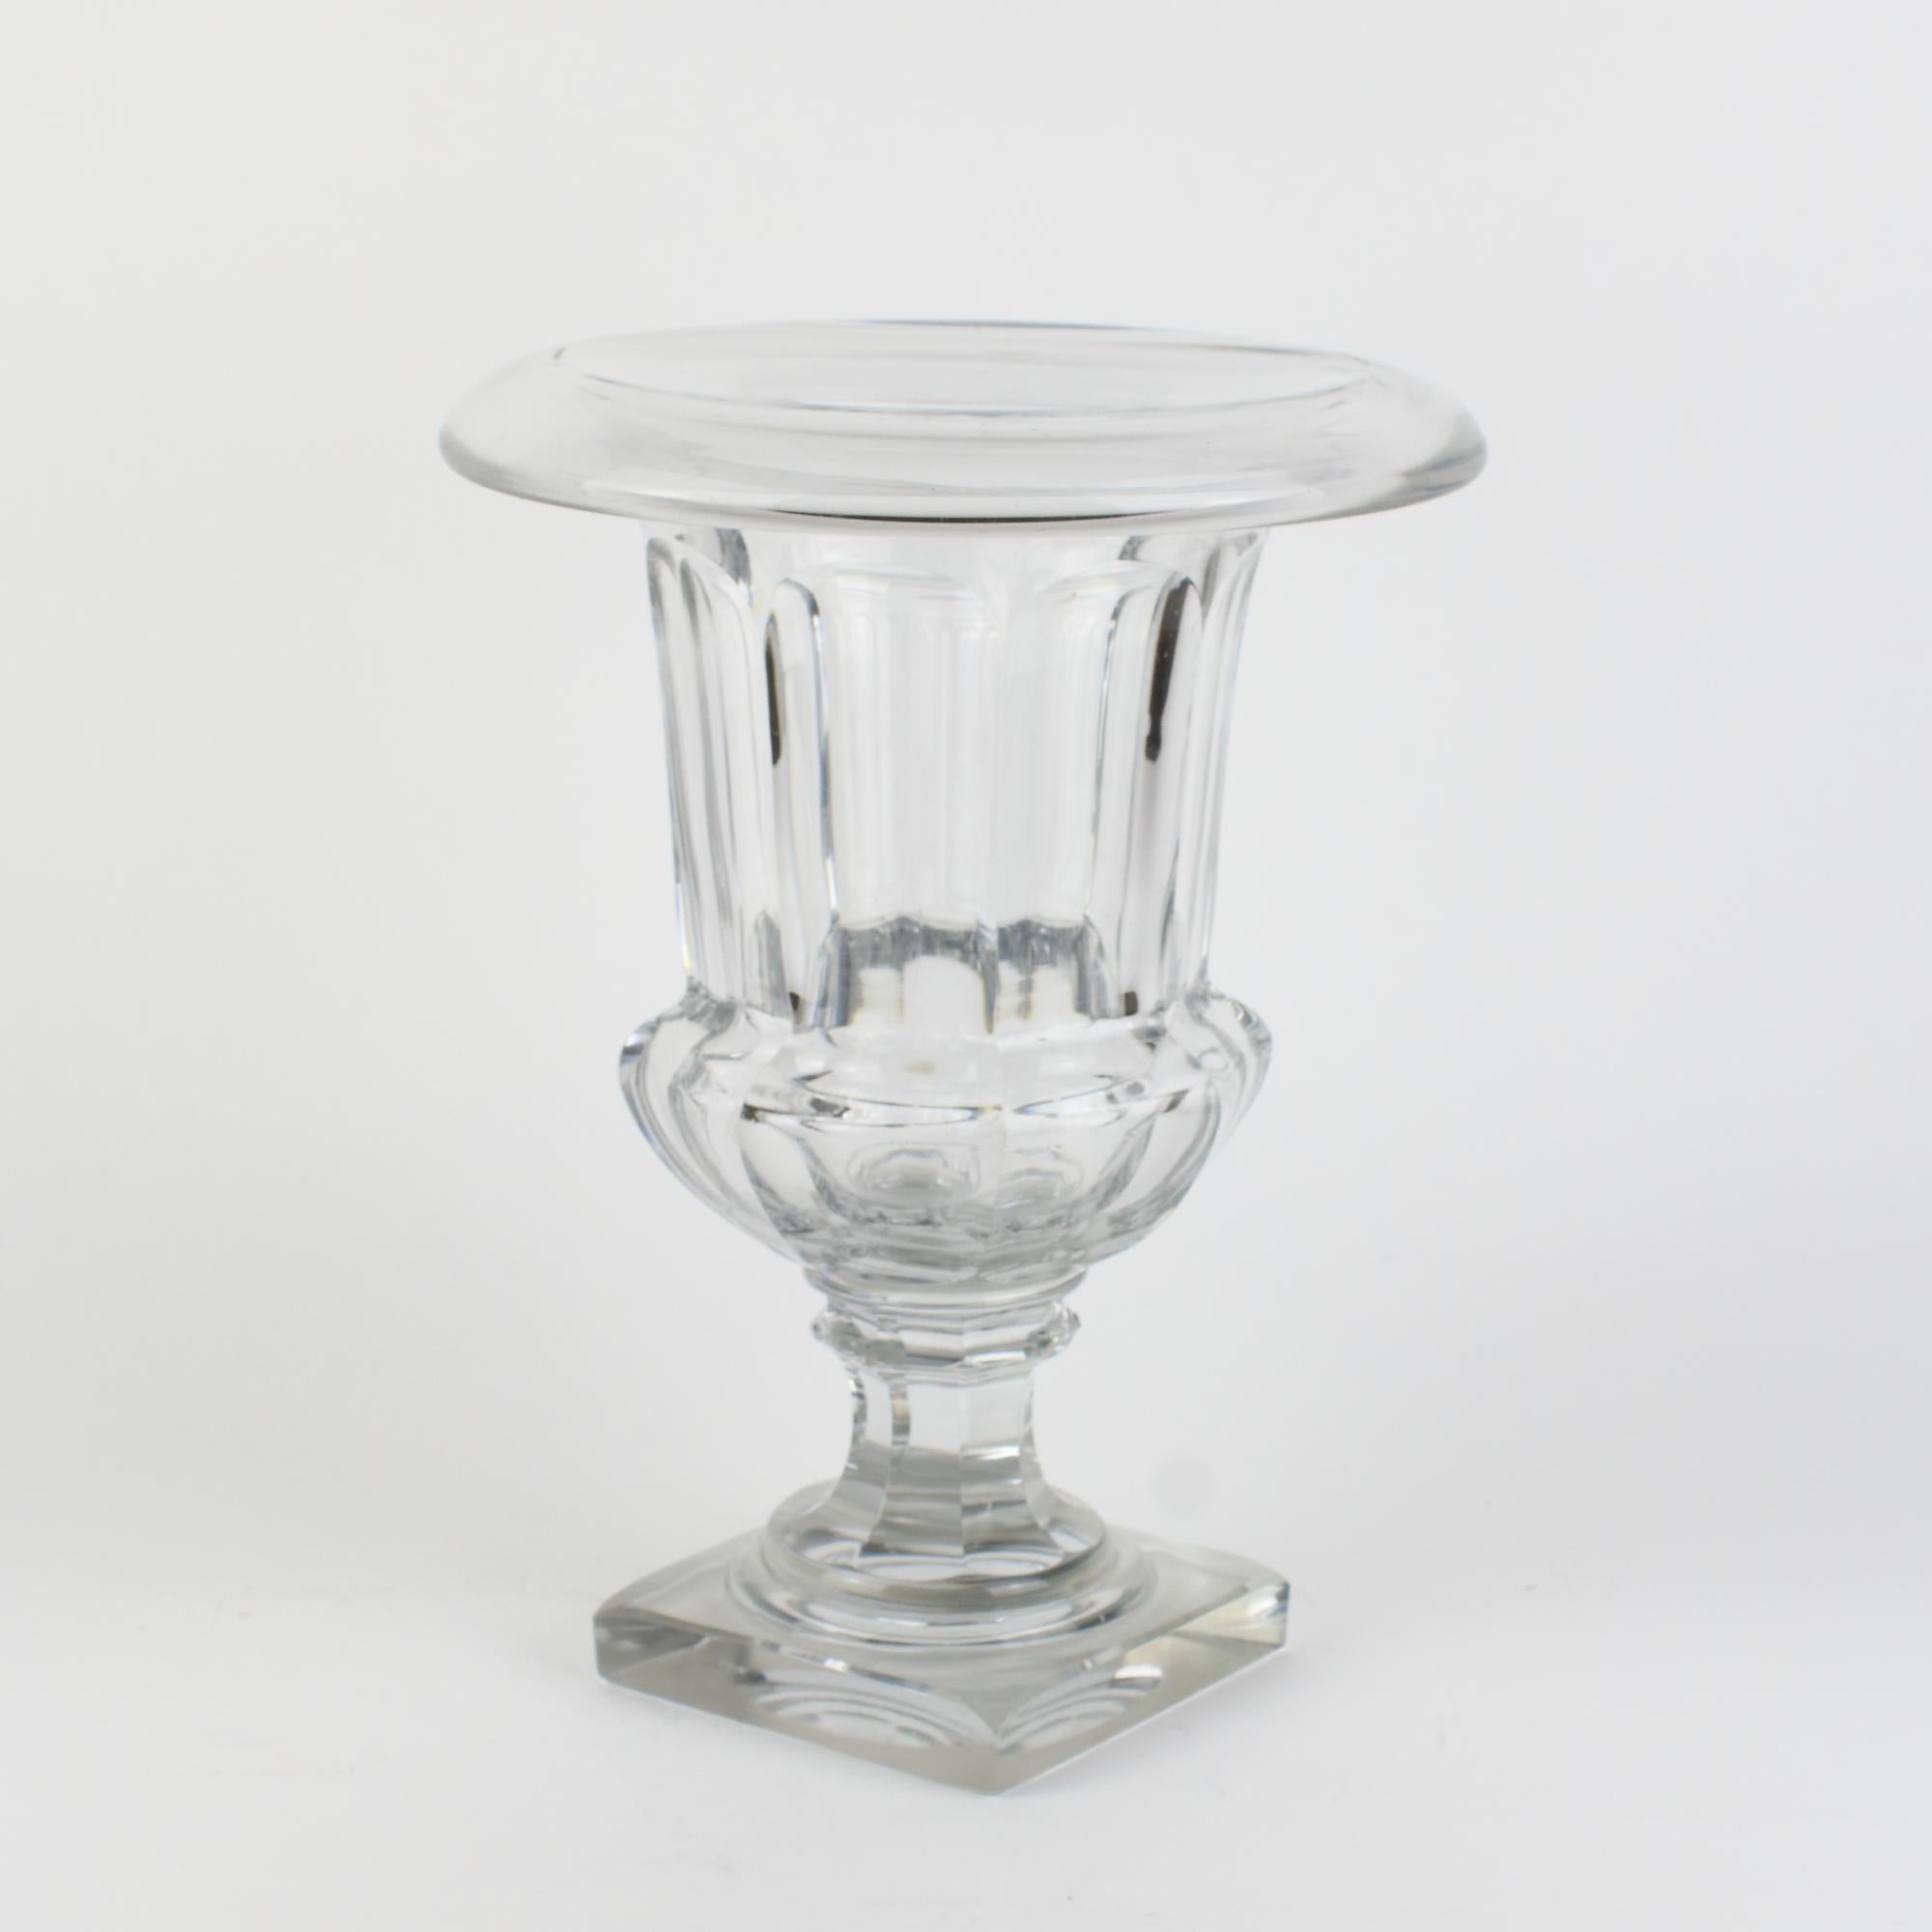 French Early 20th Century Crystal Glass Neoclassical Medici Krater Vase